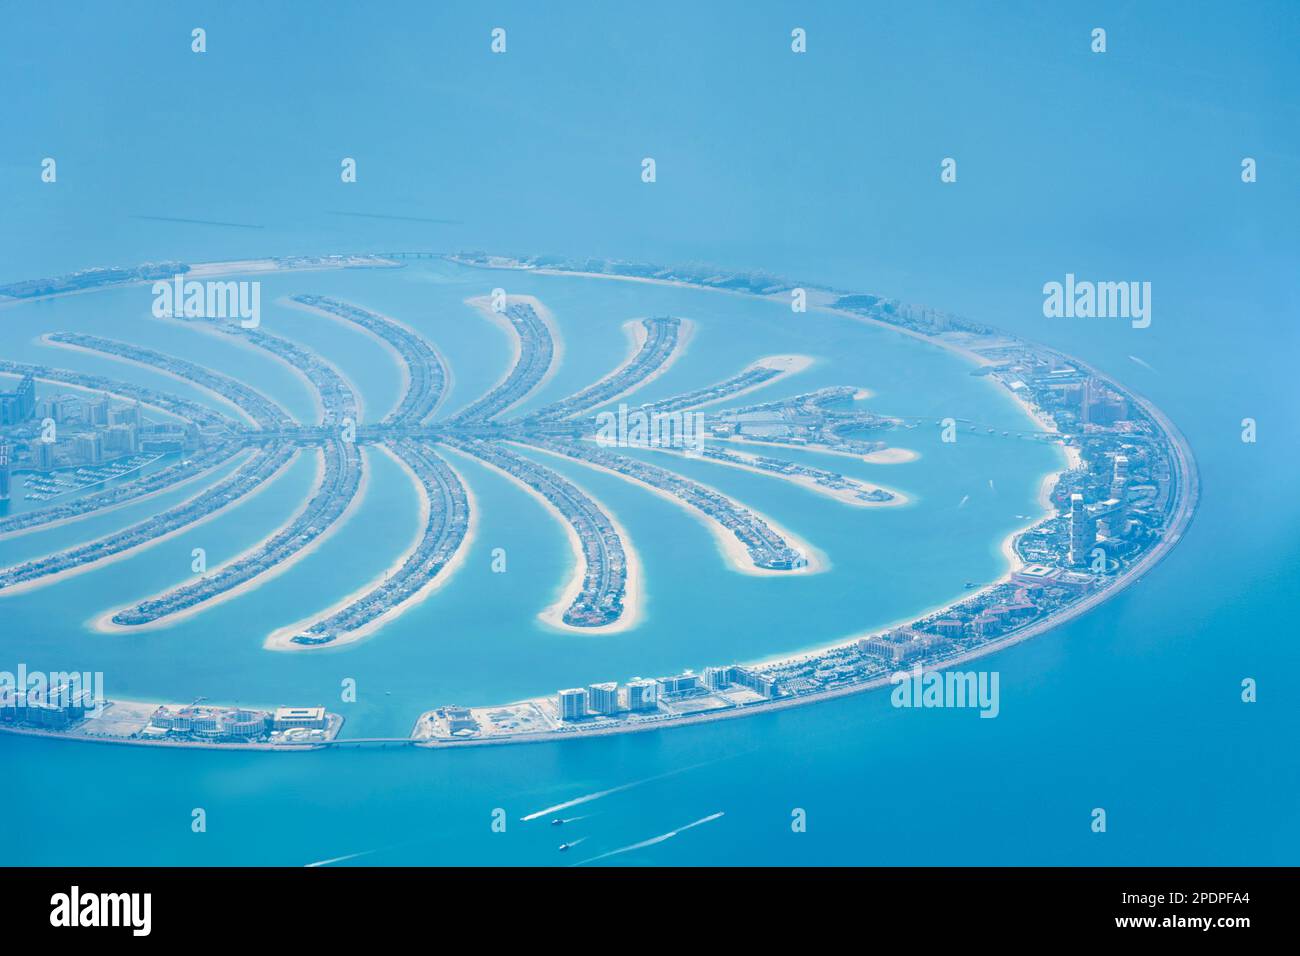 Aerial view of Palm Jumeirah, a palm shaped island created from reclaimed land in Dubai, United Arab Emirates Stock Photo